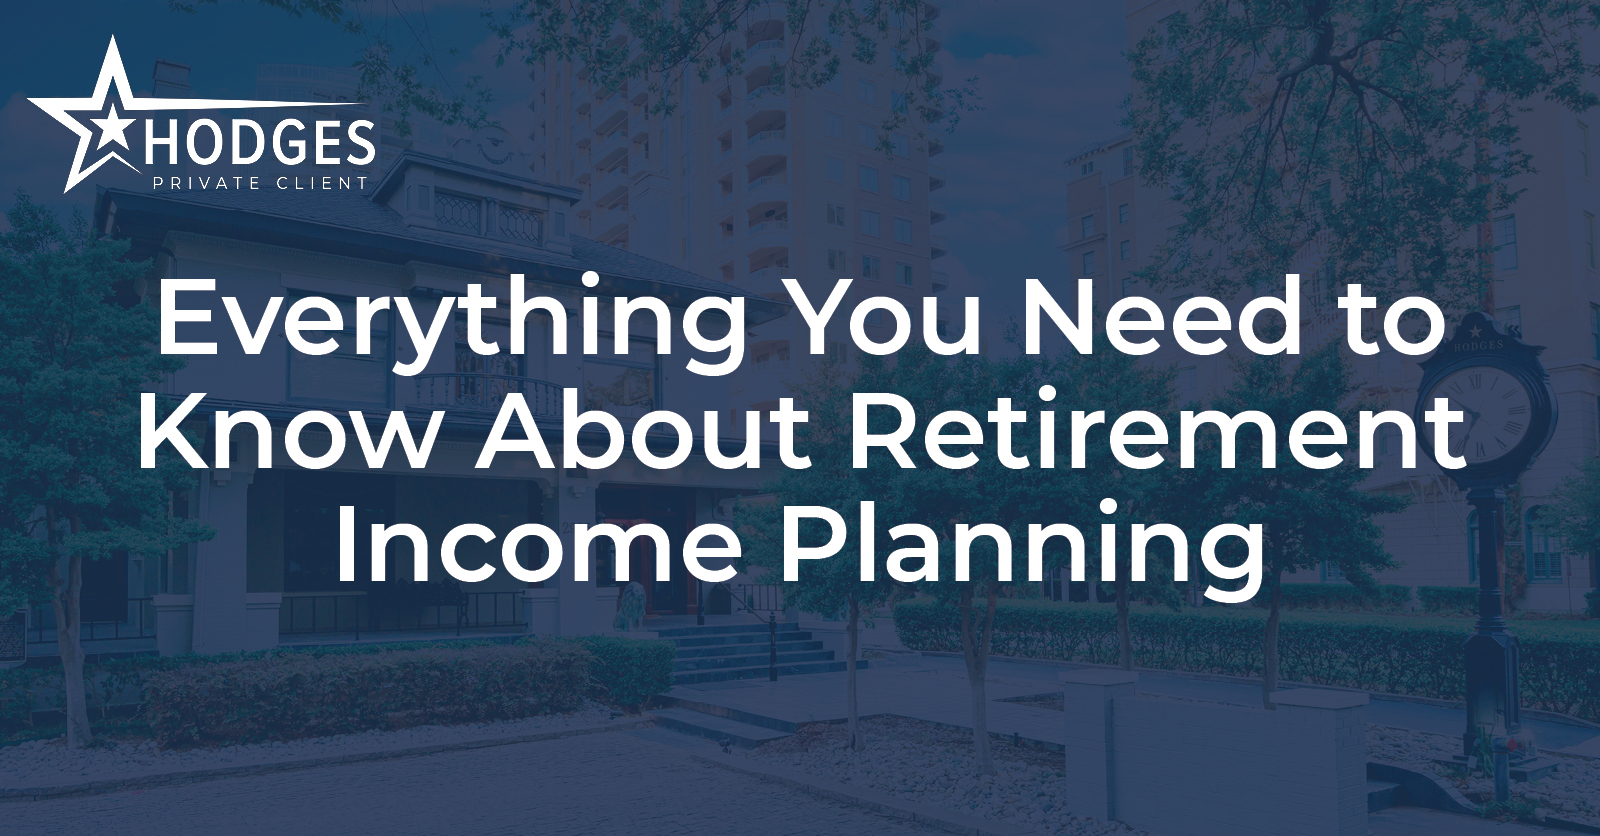 Everything You Need to Know About Retirement Income Planning